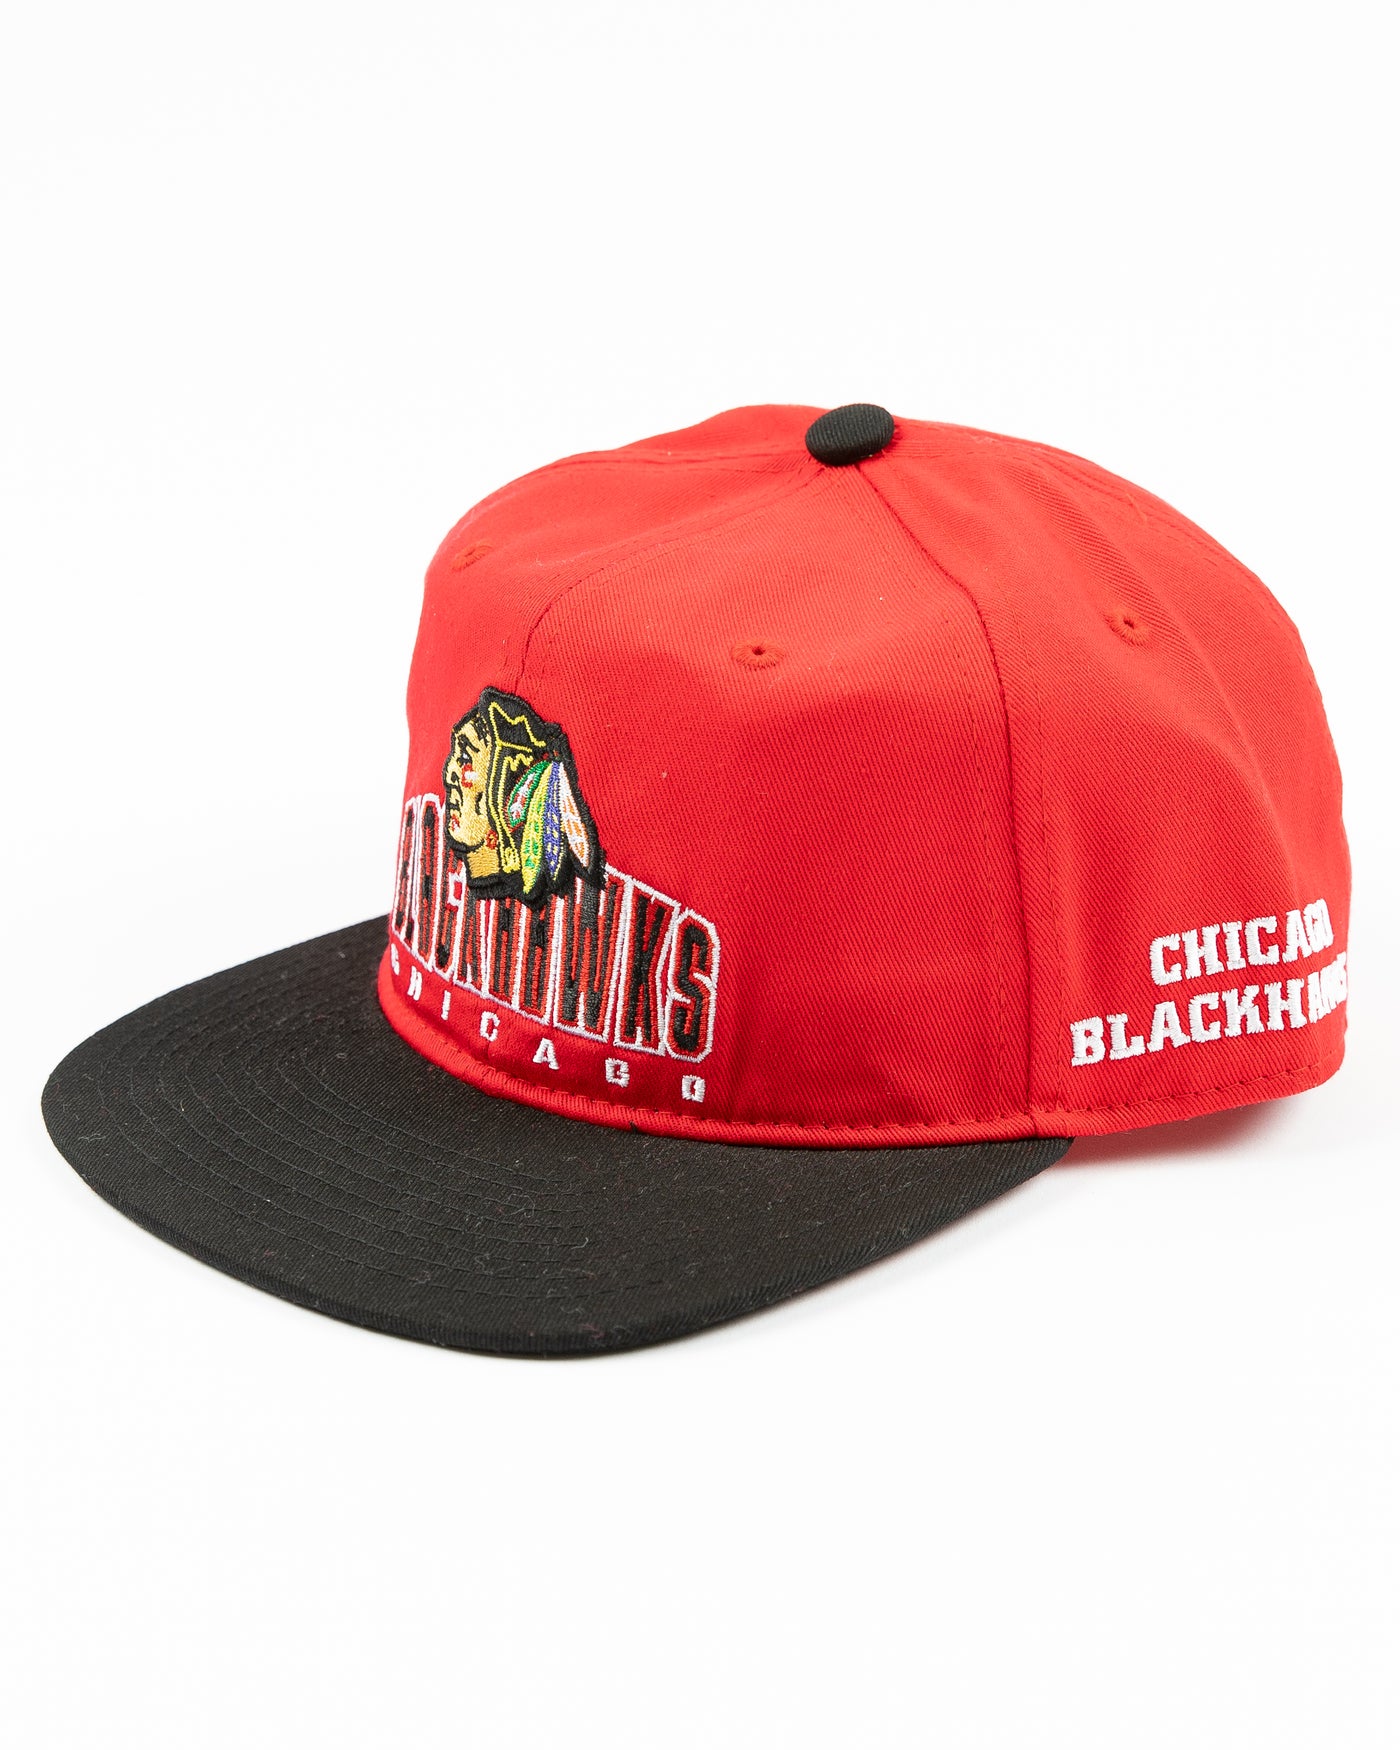 two tone red and black youth snapback cap with Chicago Blackhawks wordmark and primary logo across front - left angle lay flat